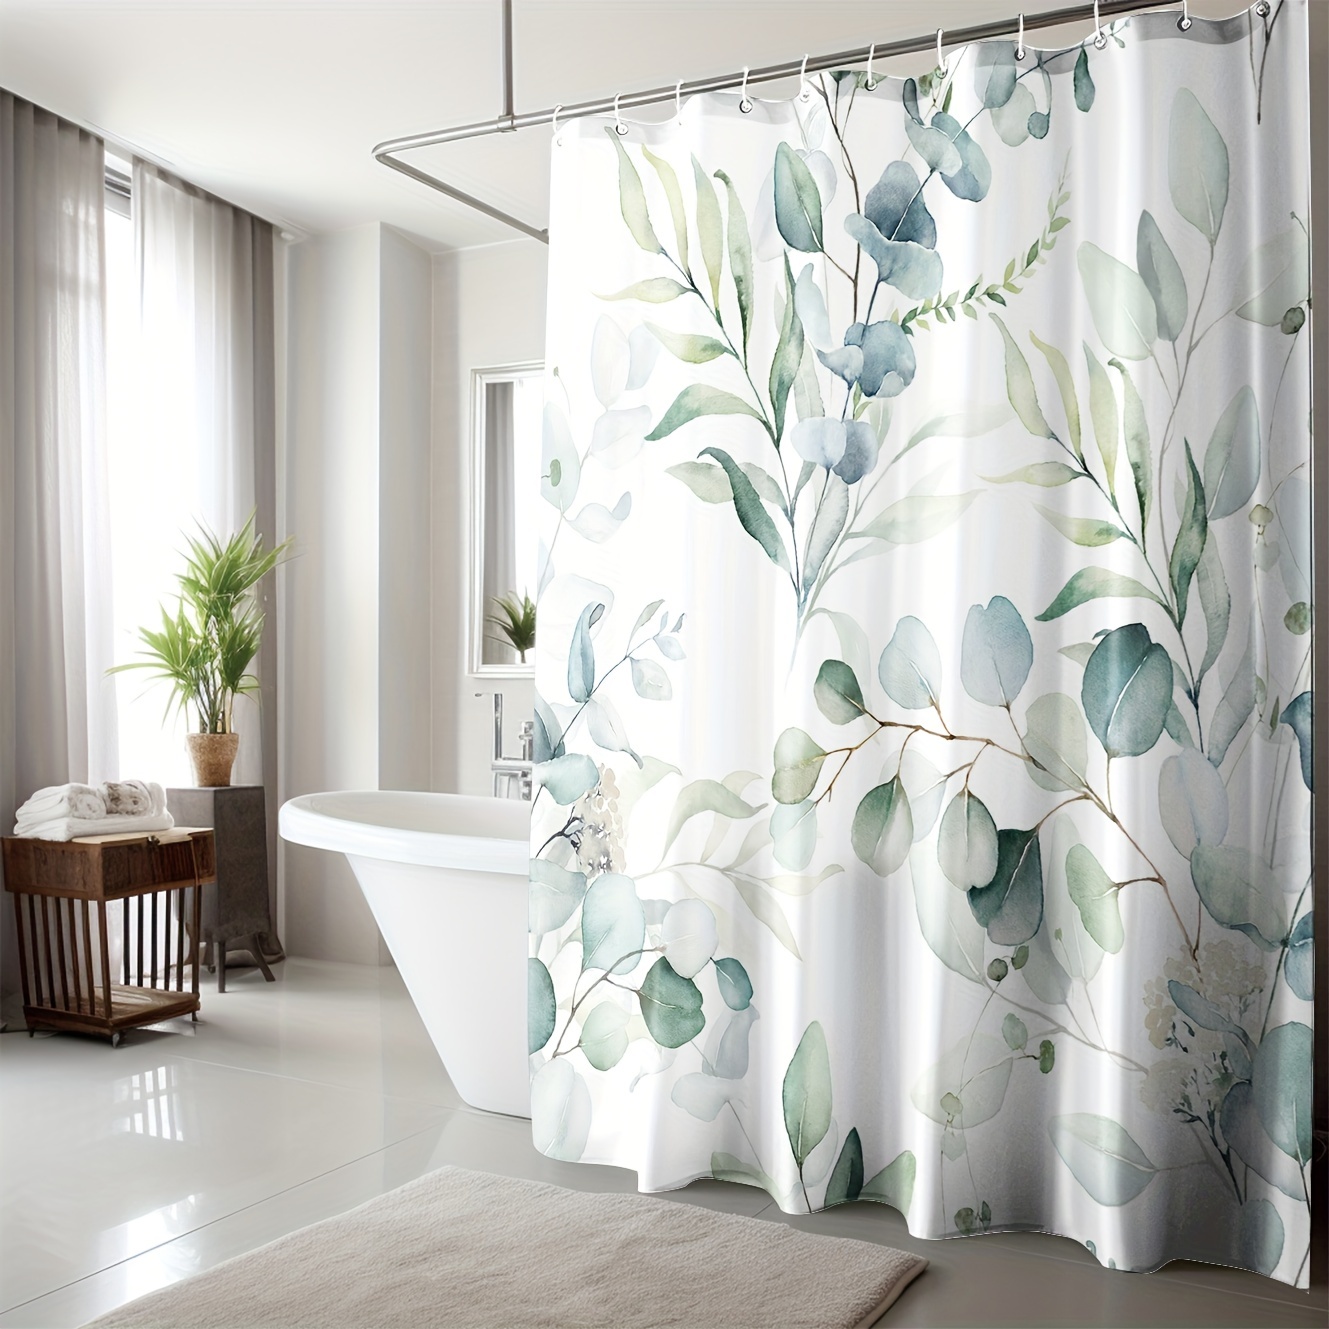 1pc Waterproof Flower and Grass Leaves Shower Curtain with 12 Hooks - Soft  and Durable Fabric for Bathroom Decor